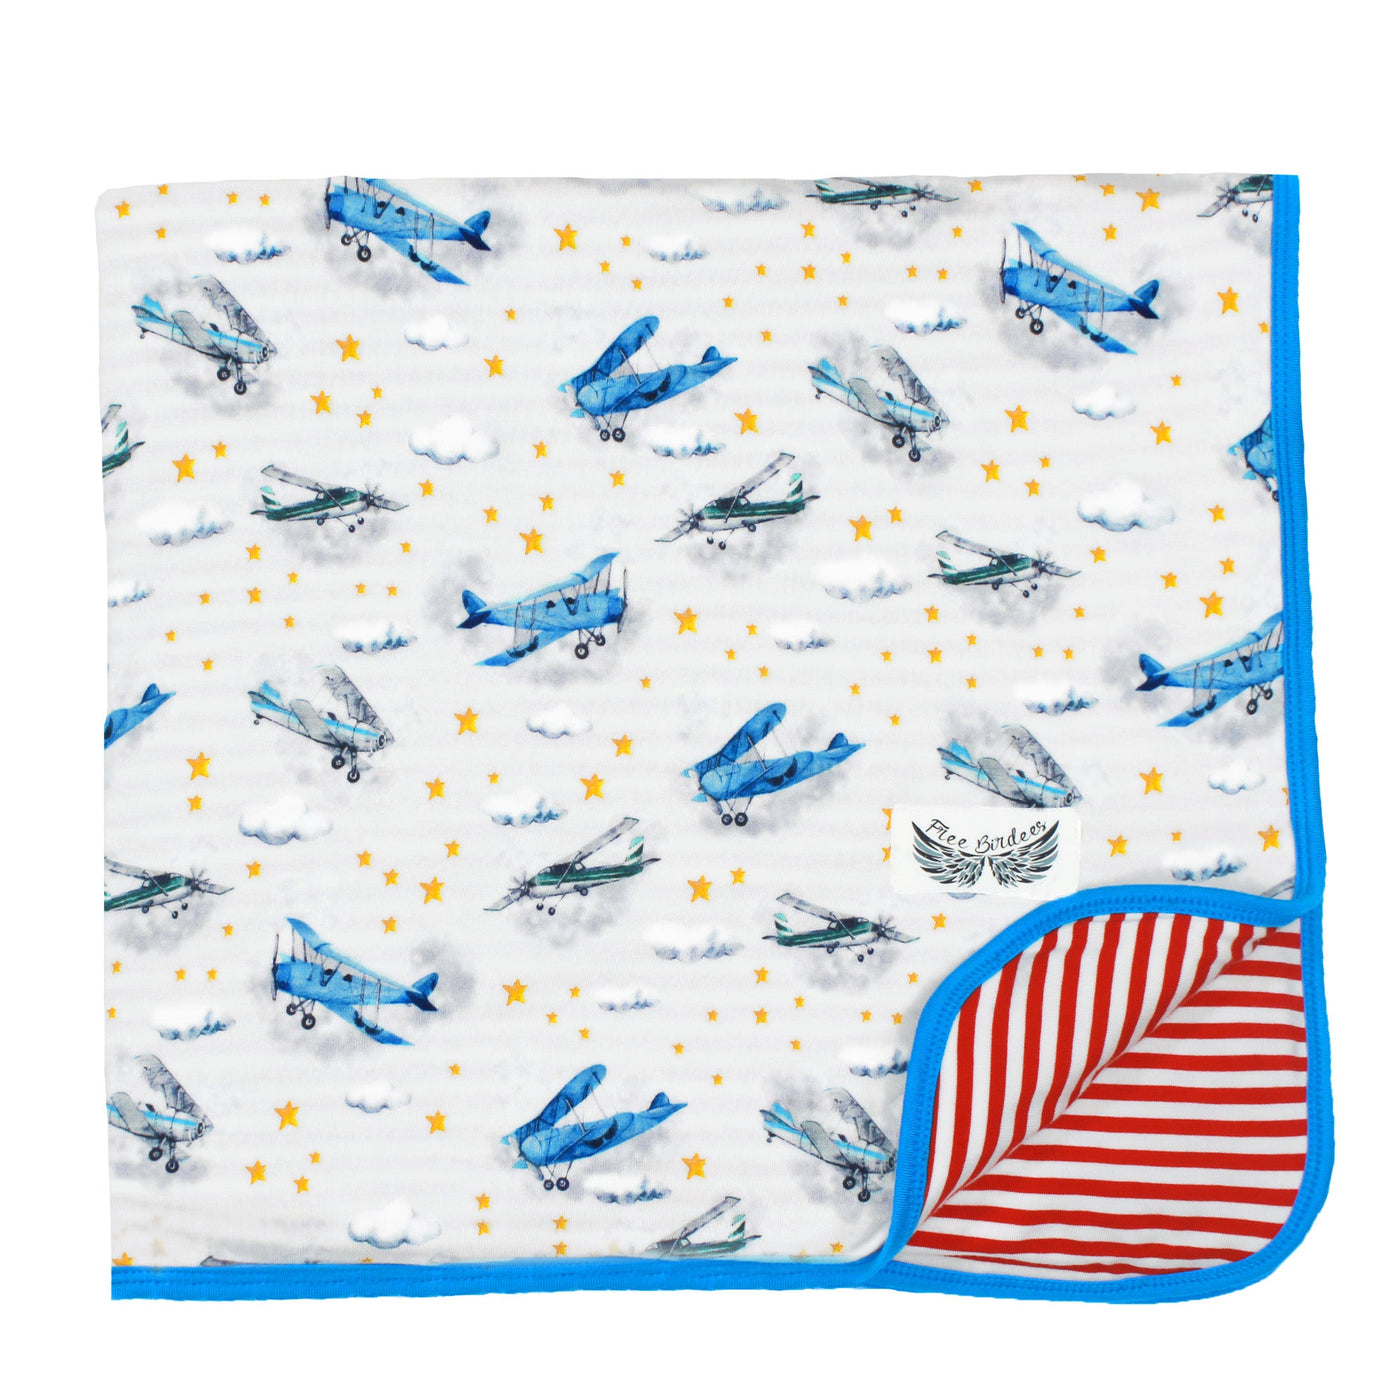 Planes Flying on Cloud 9 Double-Layered Throw Blanket - Free Birdees